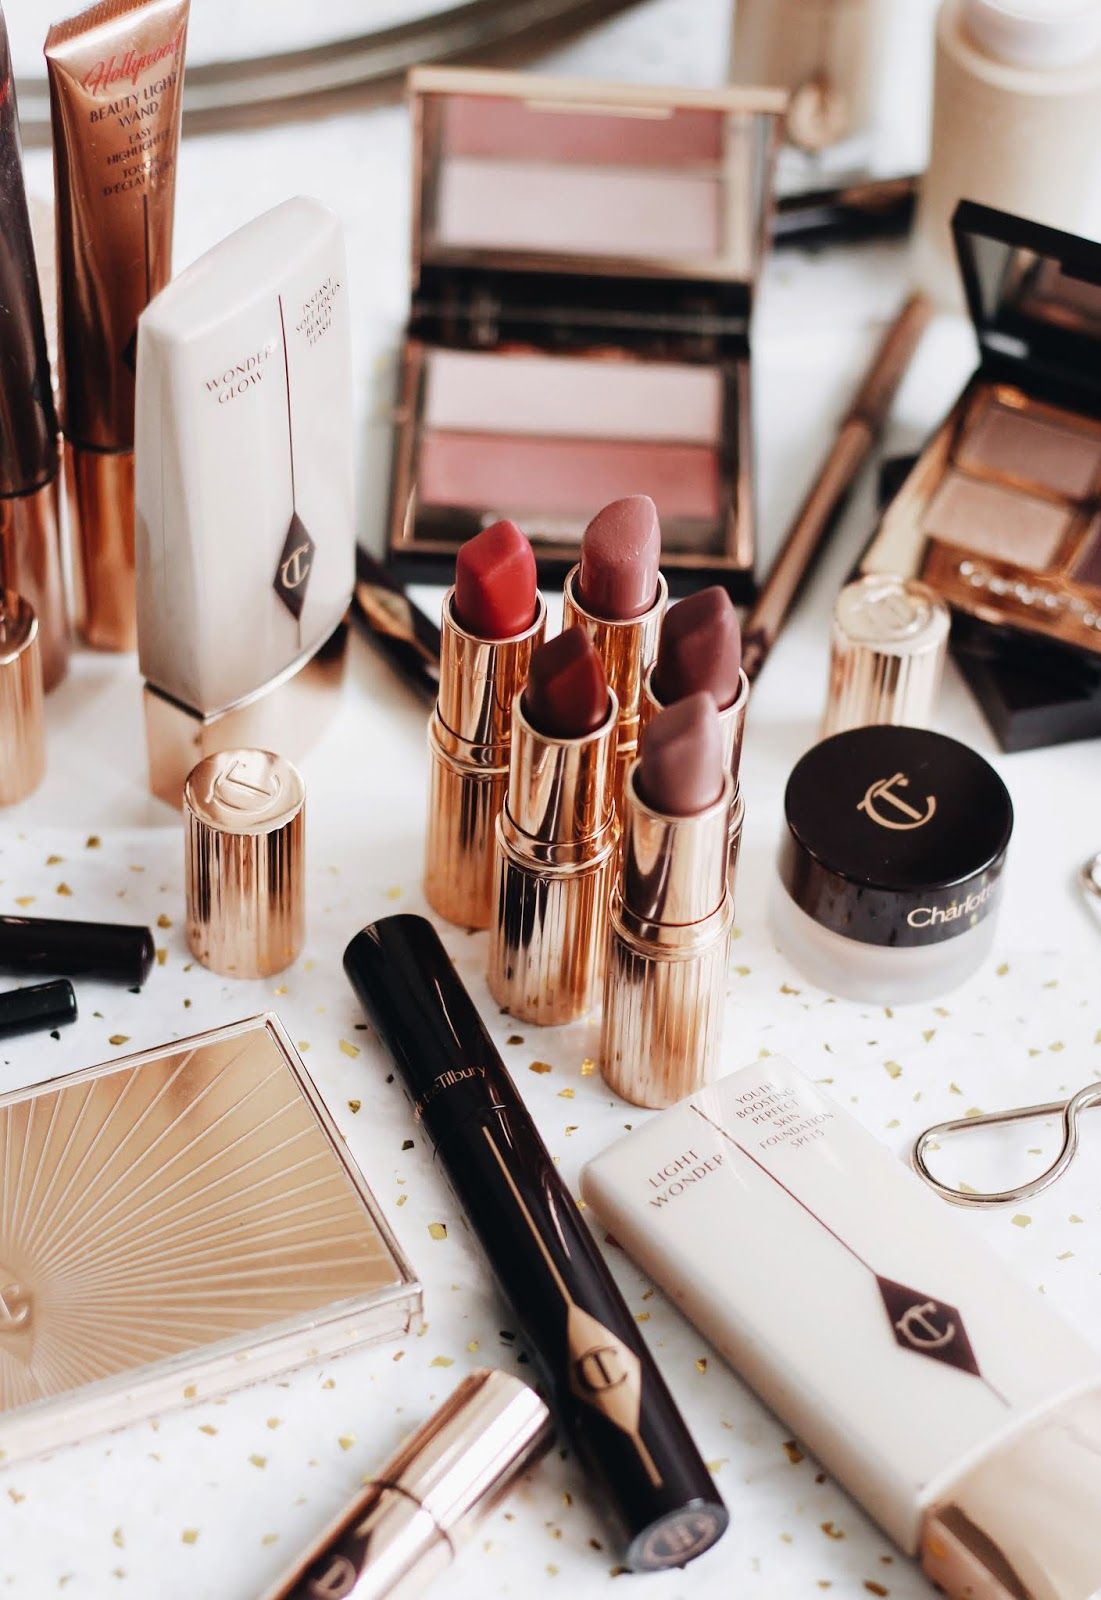 Charlotte Tilbury Makeup and Skincare Collection -   12 makeup Products collection ideas